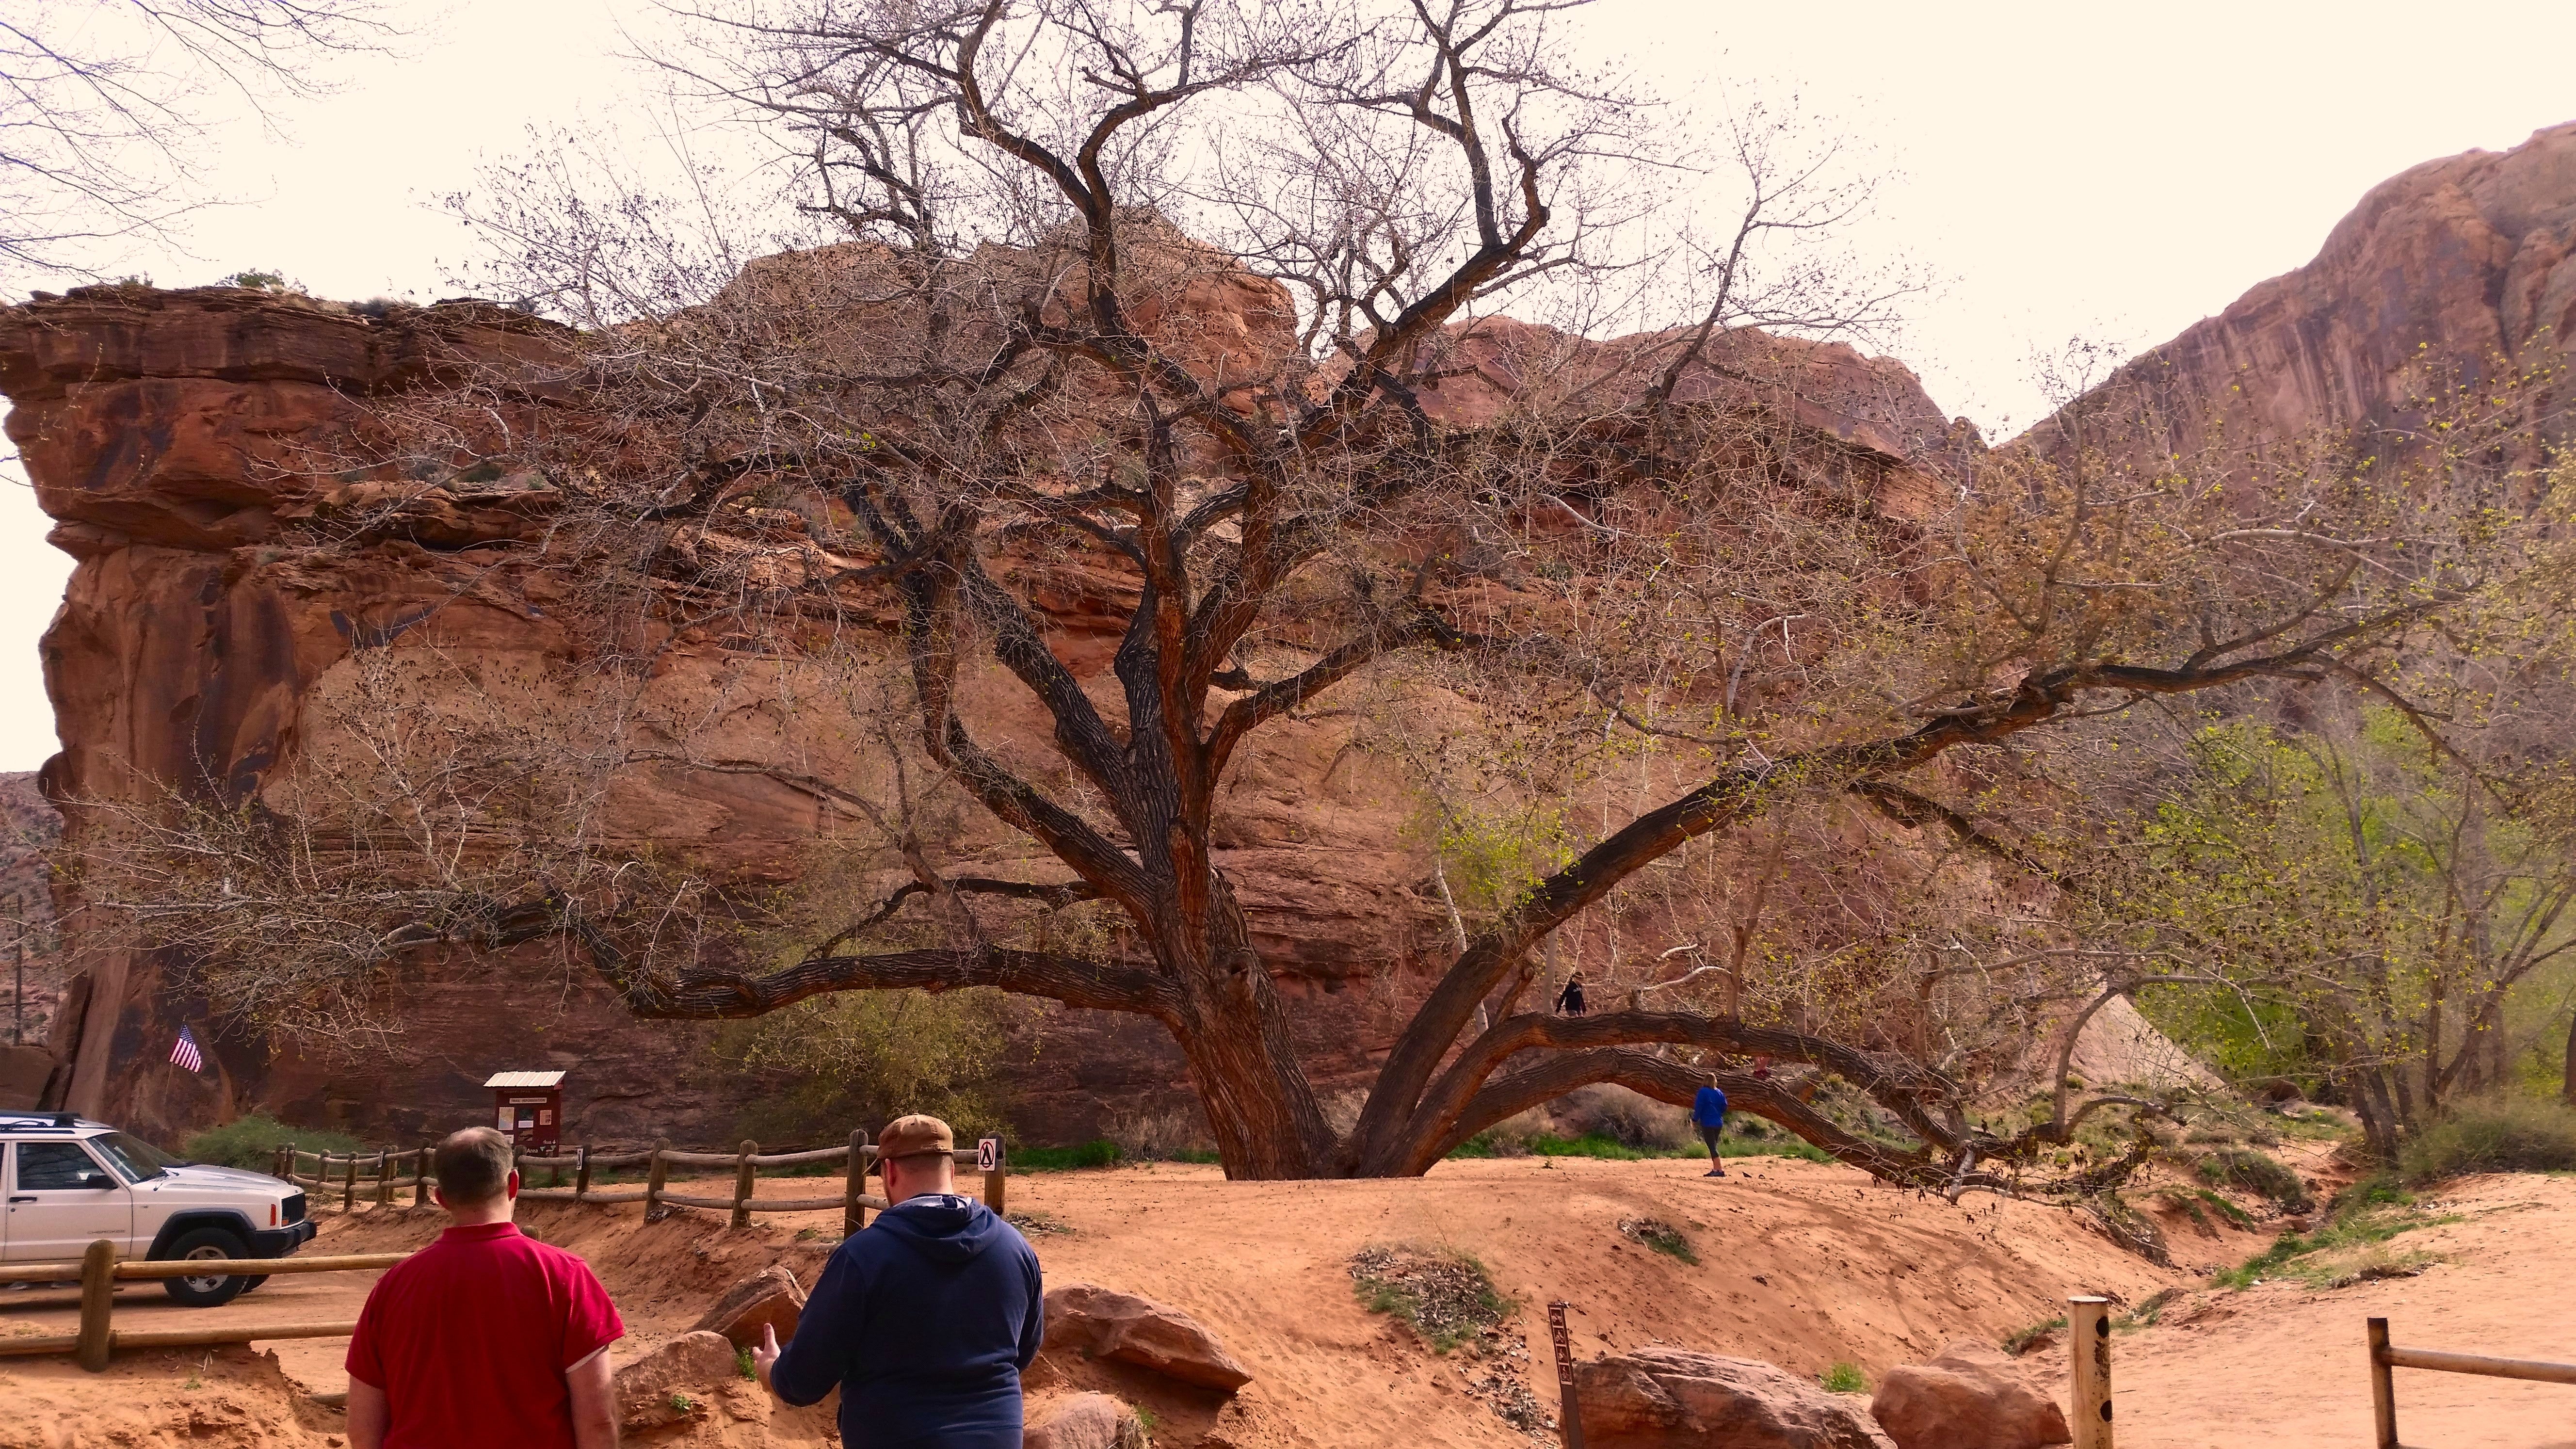 Large tree at the mouth of the canyon